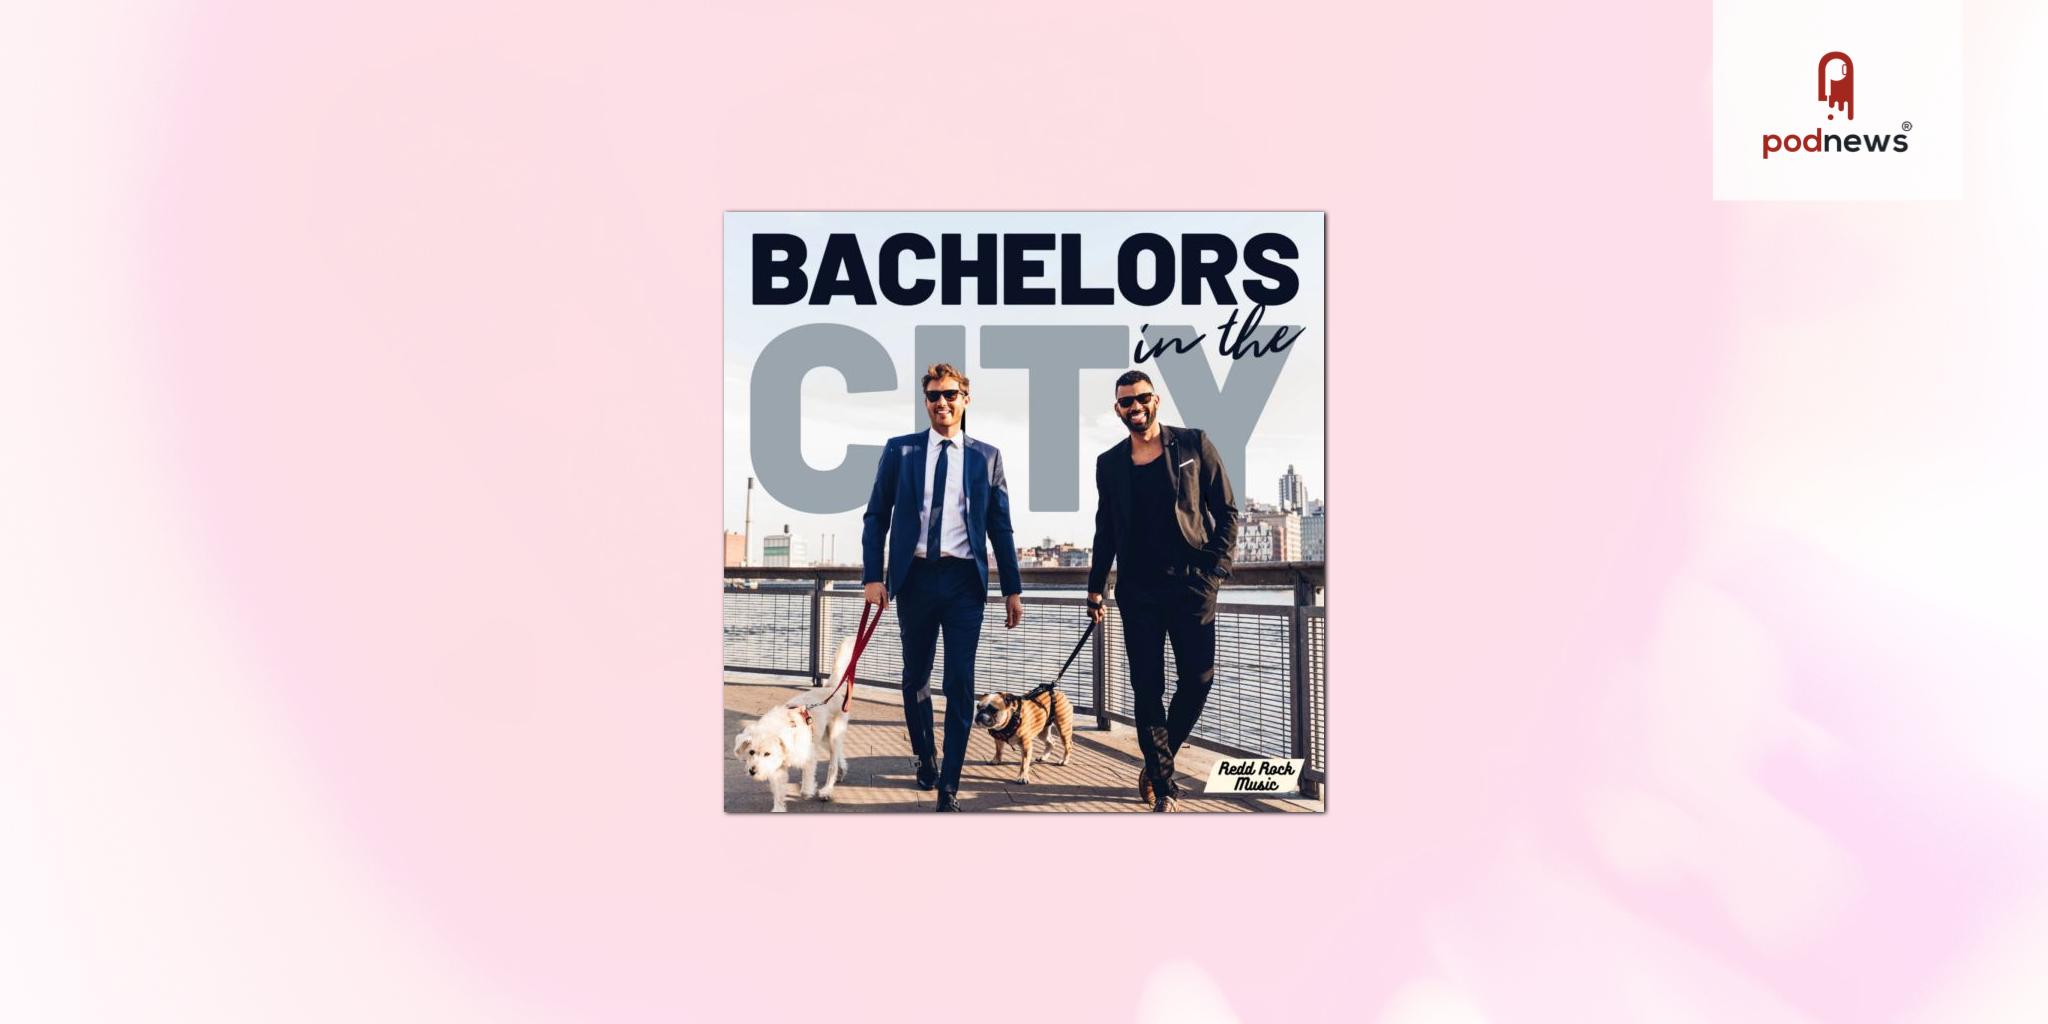 Peter Weber and Dustin Kendrick’s Bachelors in the City podcast adopts Acast+